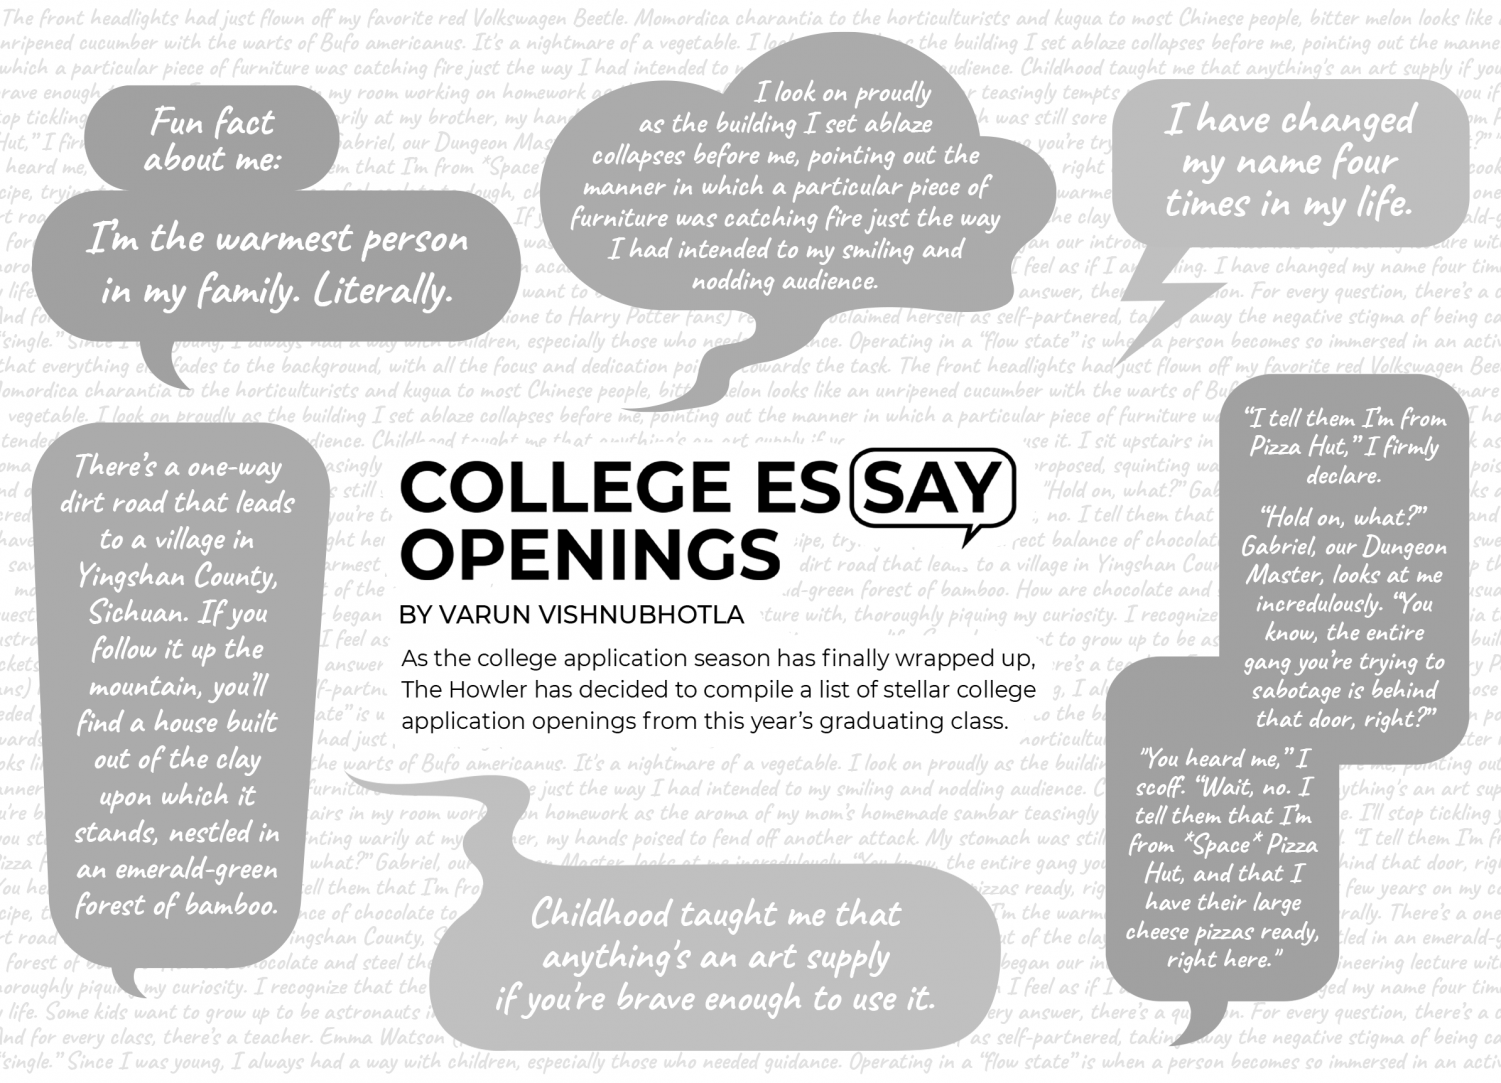 examples of college essay openers